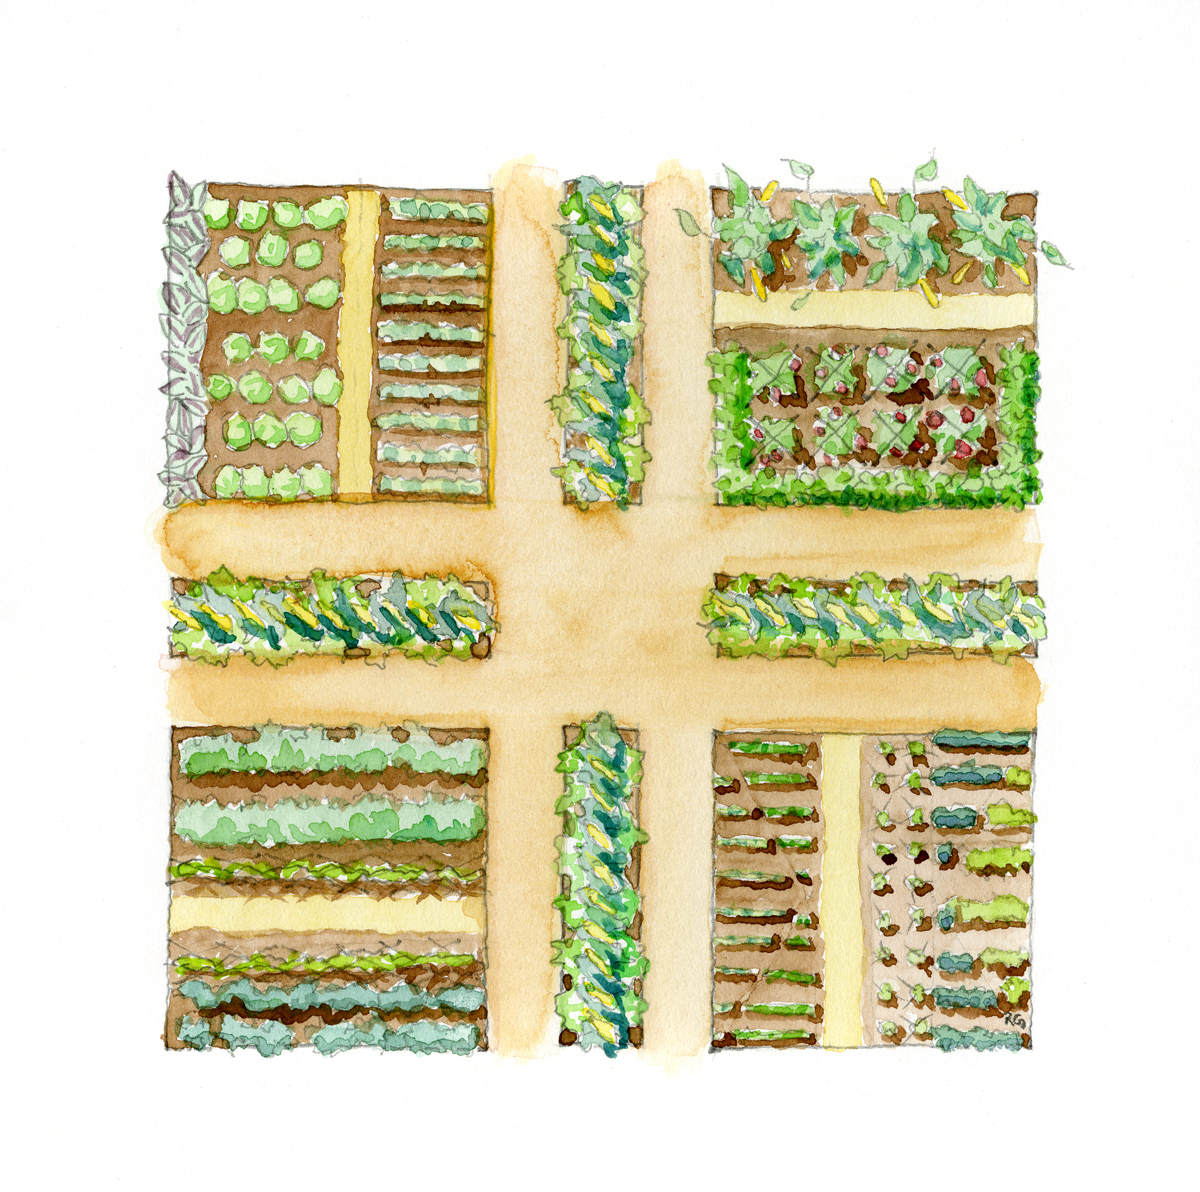 Vegetable Garden Drawing at Explore collection of